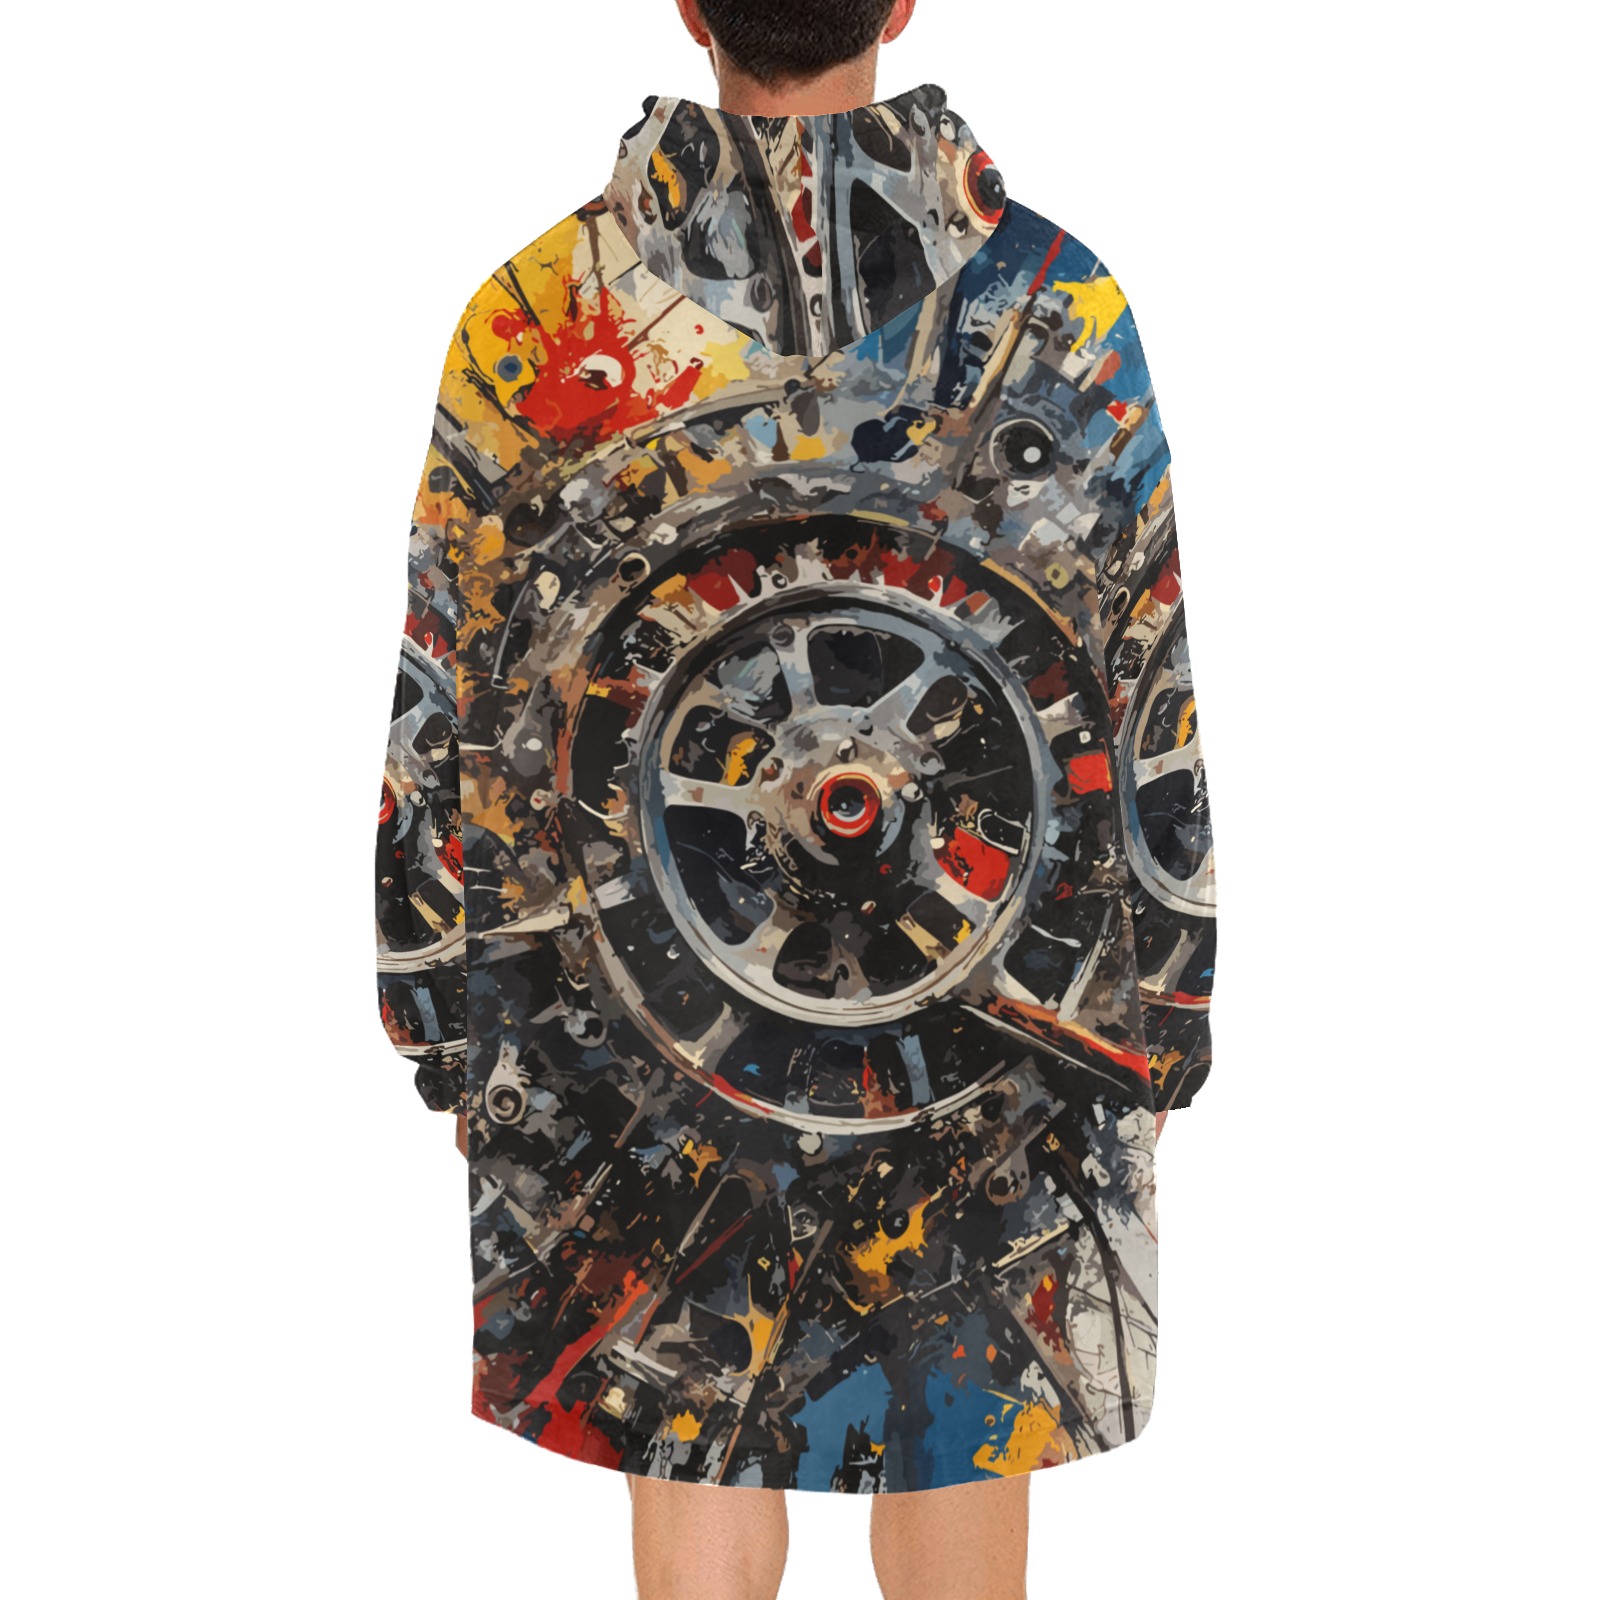 Abstract Aviation Engine Cool Fantasy Colorful Art Blanket Hoodie for Men